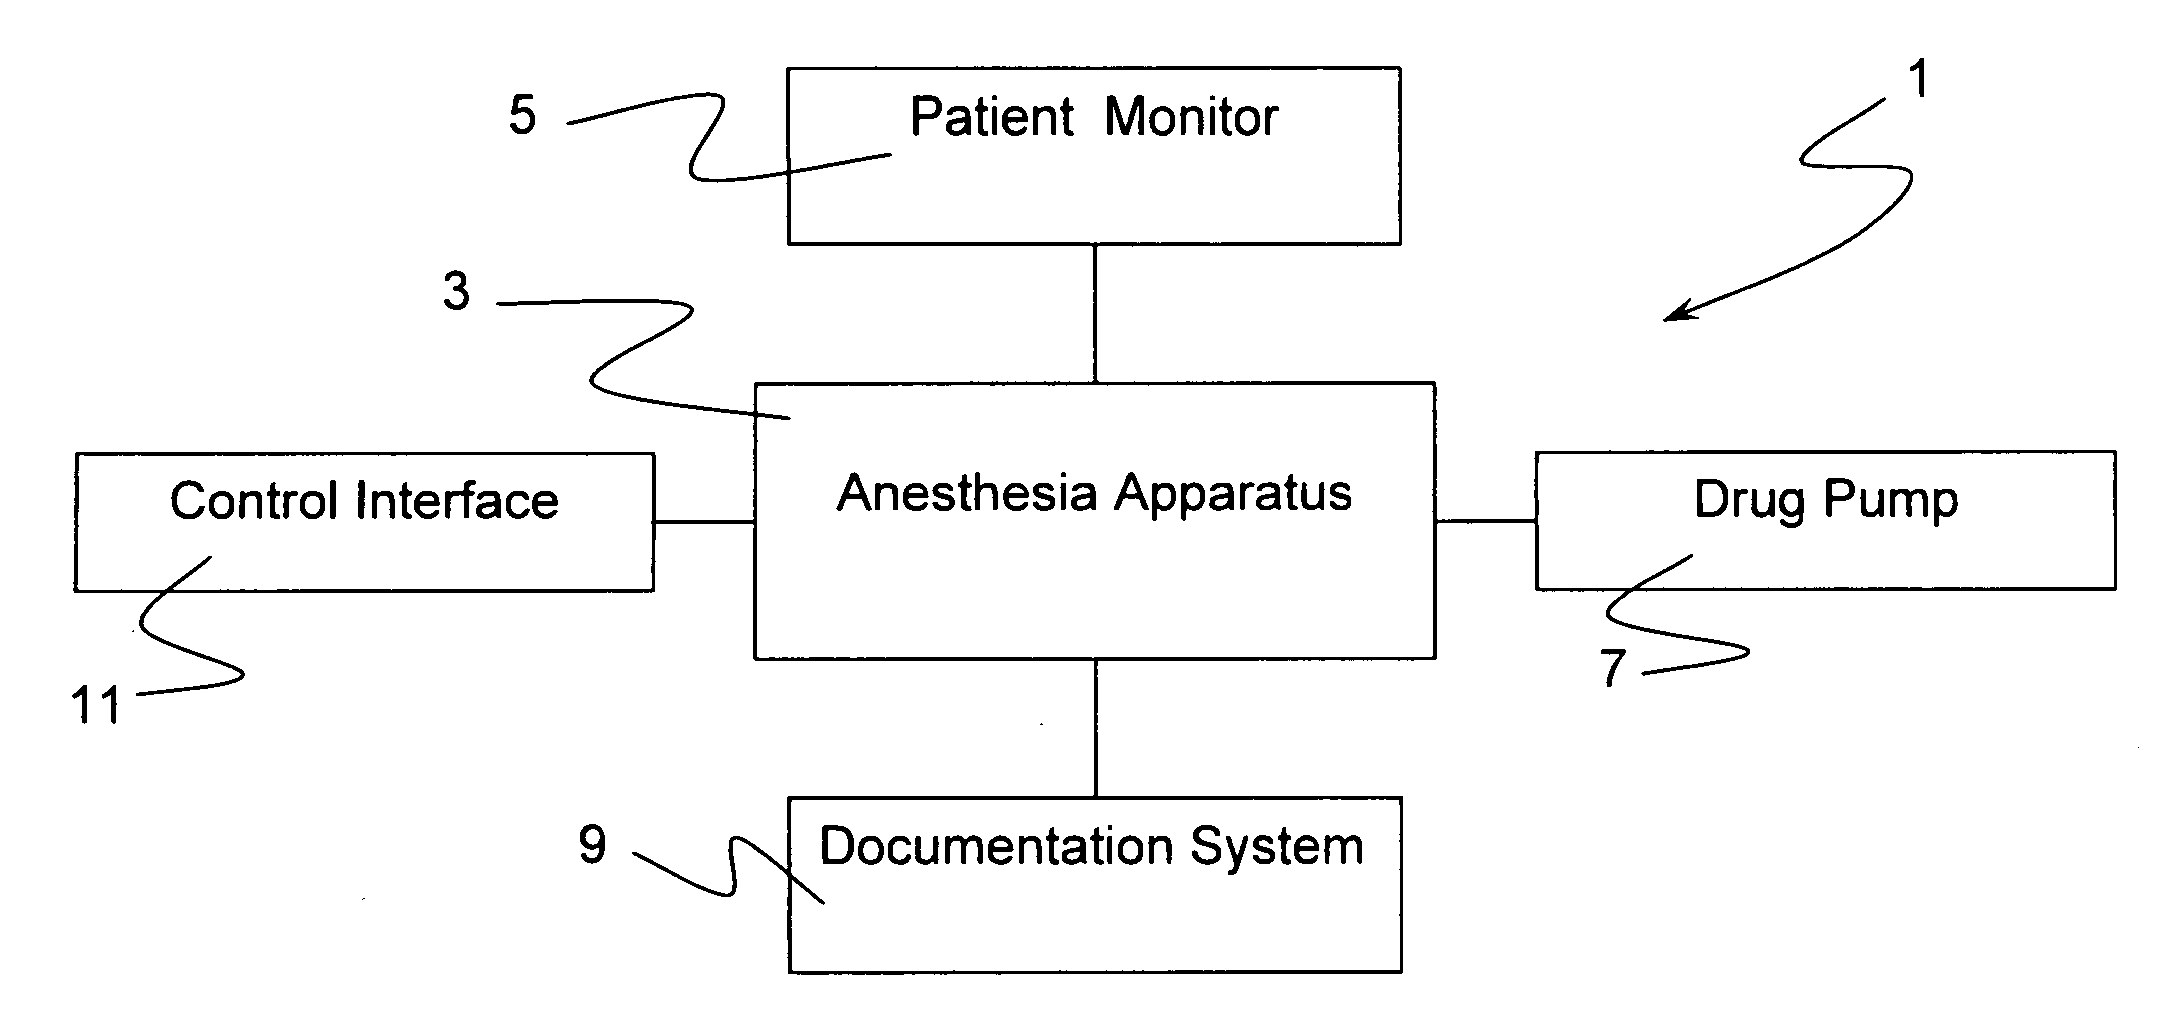 Medical workstation with integrated support of process steps